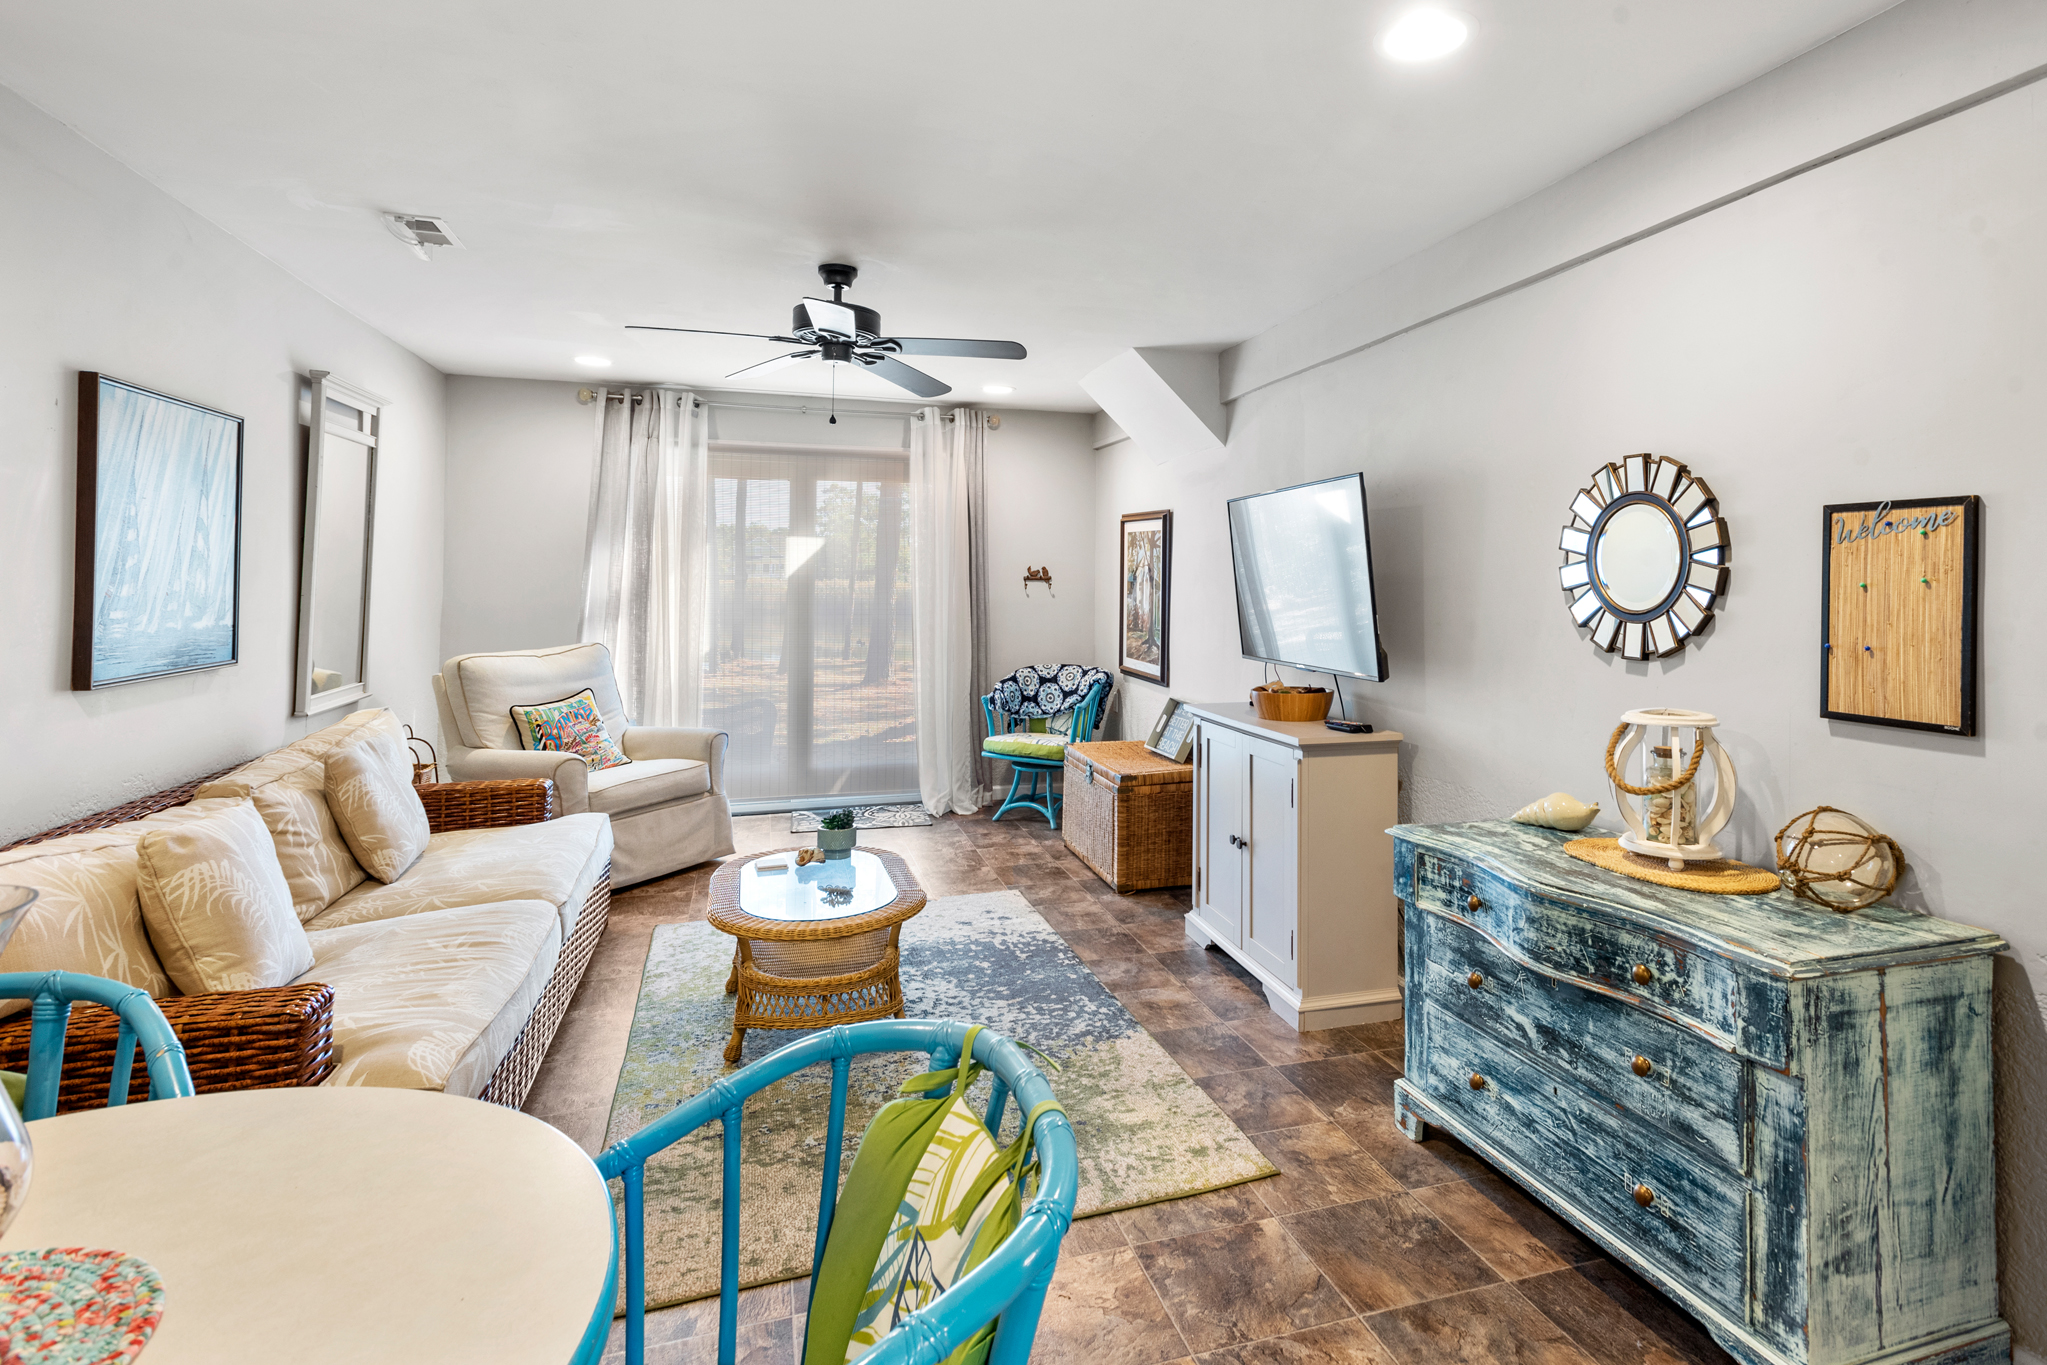 MNT1148: Sound Choice In Manteo | Bottom Level Apartment Living/Dining Area